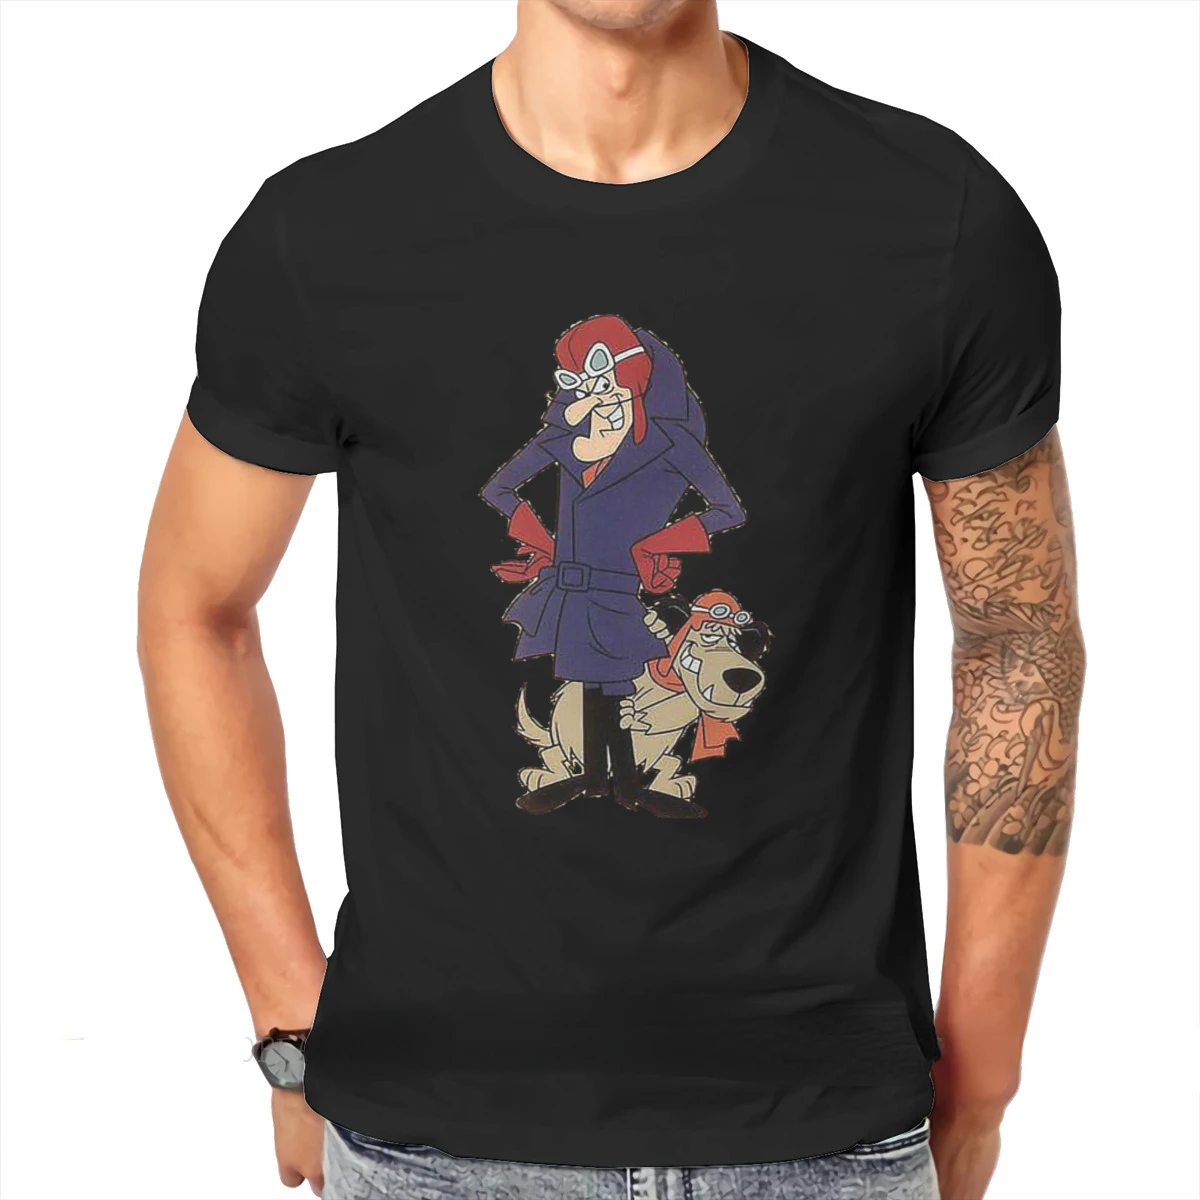 Dick Dastardly and Muttley Wacky Races1968 Anime TV Series Tshirt Casual Punk T Shirt Tops Homme Modal Tees Tops